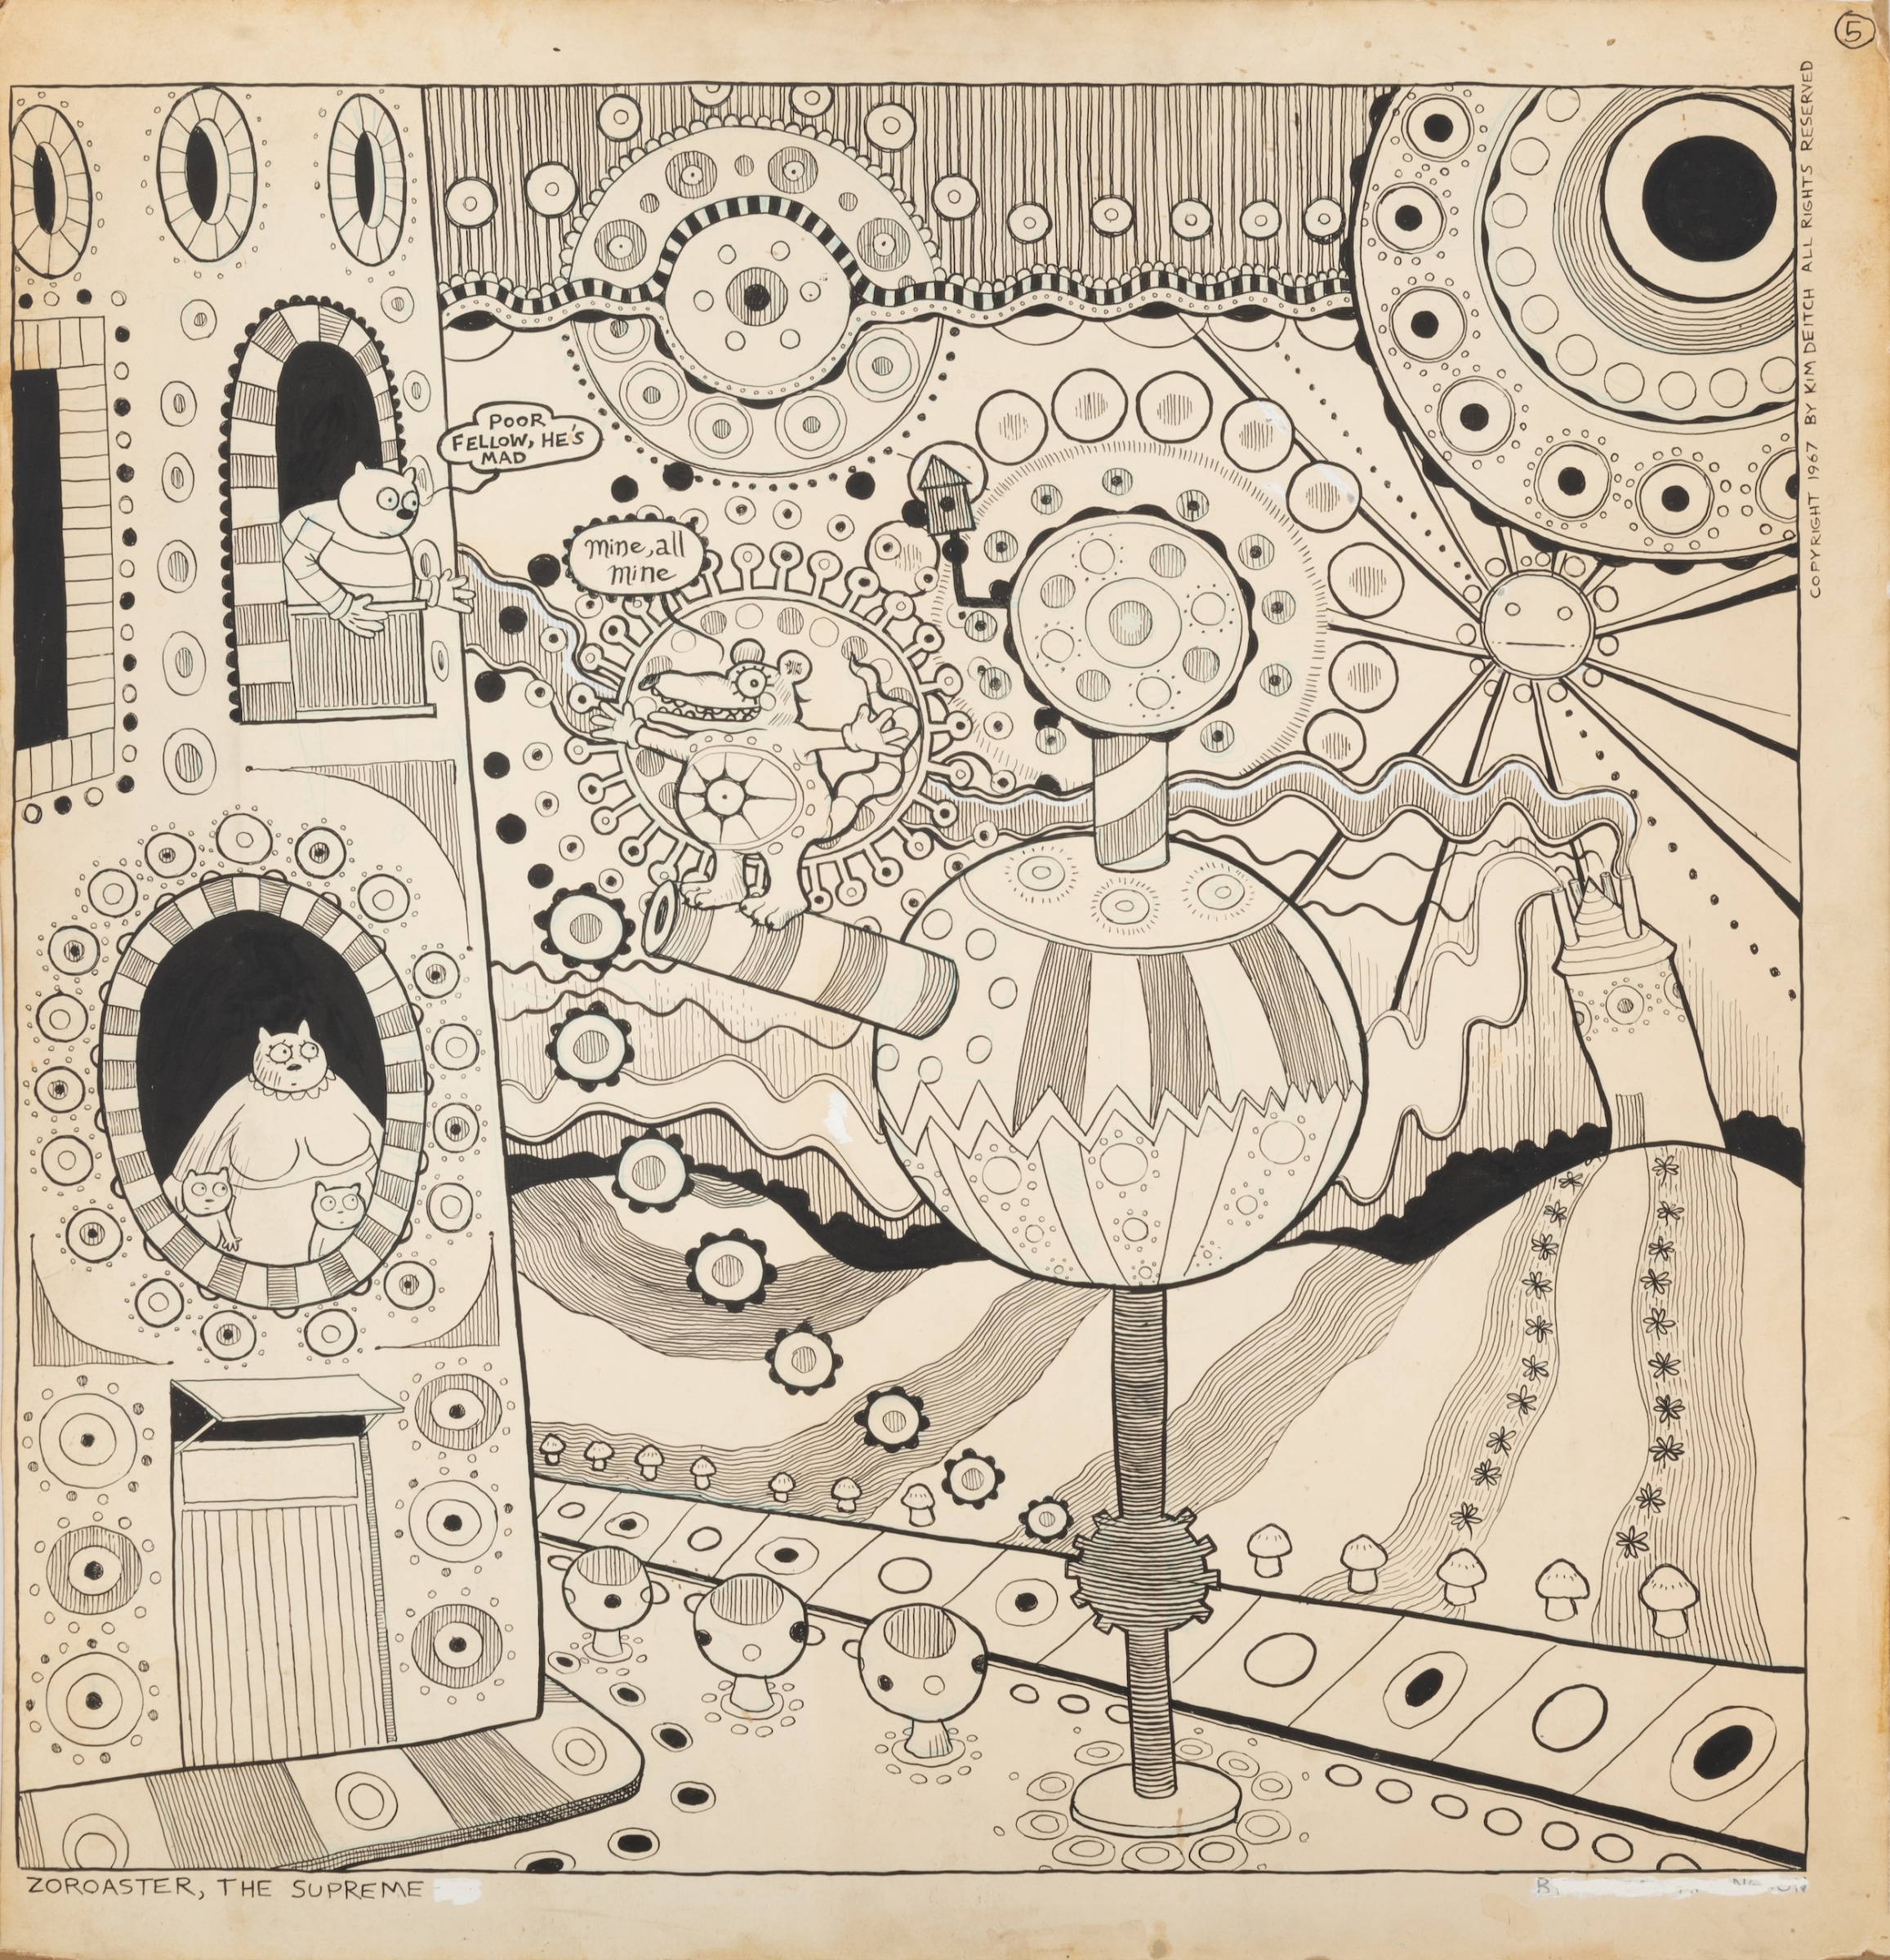 Kim Deitch (b. 1944)
Zoroaster, The Supreme, 1969
Ink on board
Published in The East Village Other
24 x 23.5 inches